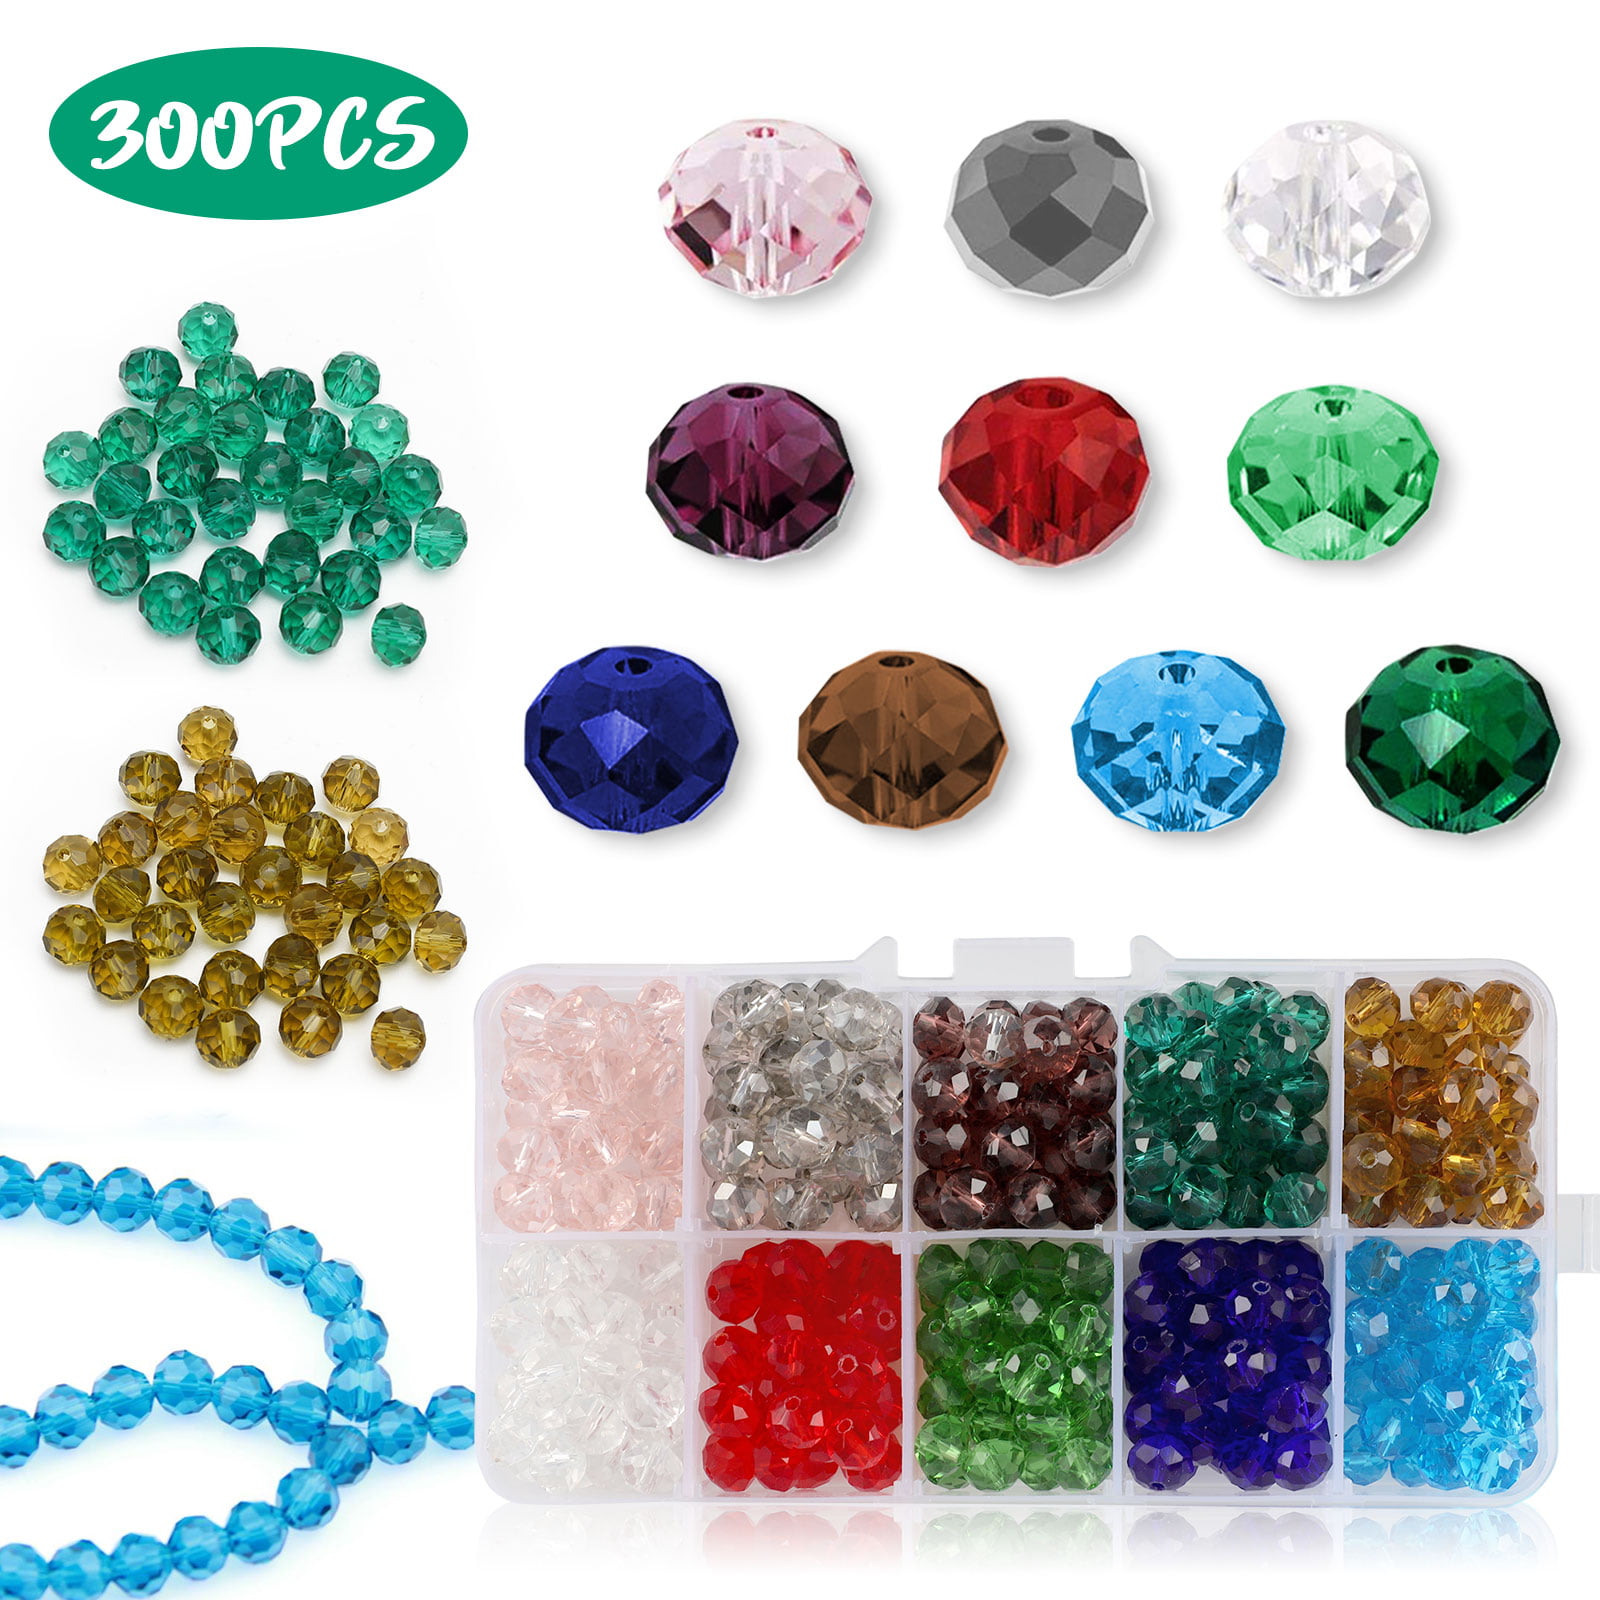 50/72pcs Bicone Crystal Spacer Beads Double Cone Jewelry Makings DIY 8mm/12mm PW 